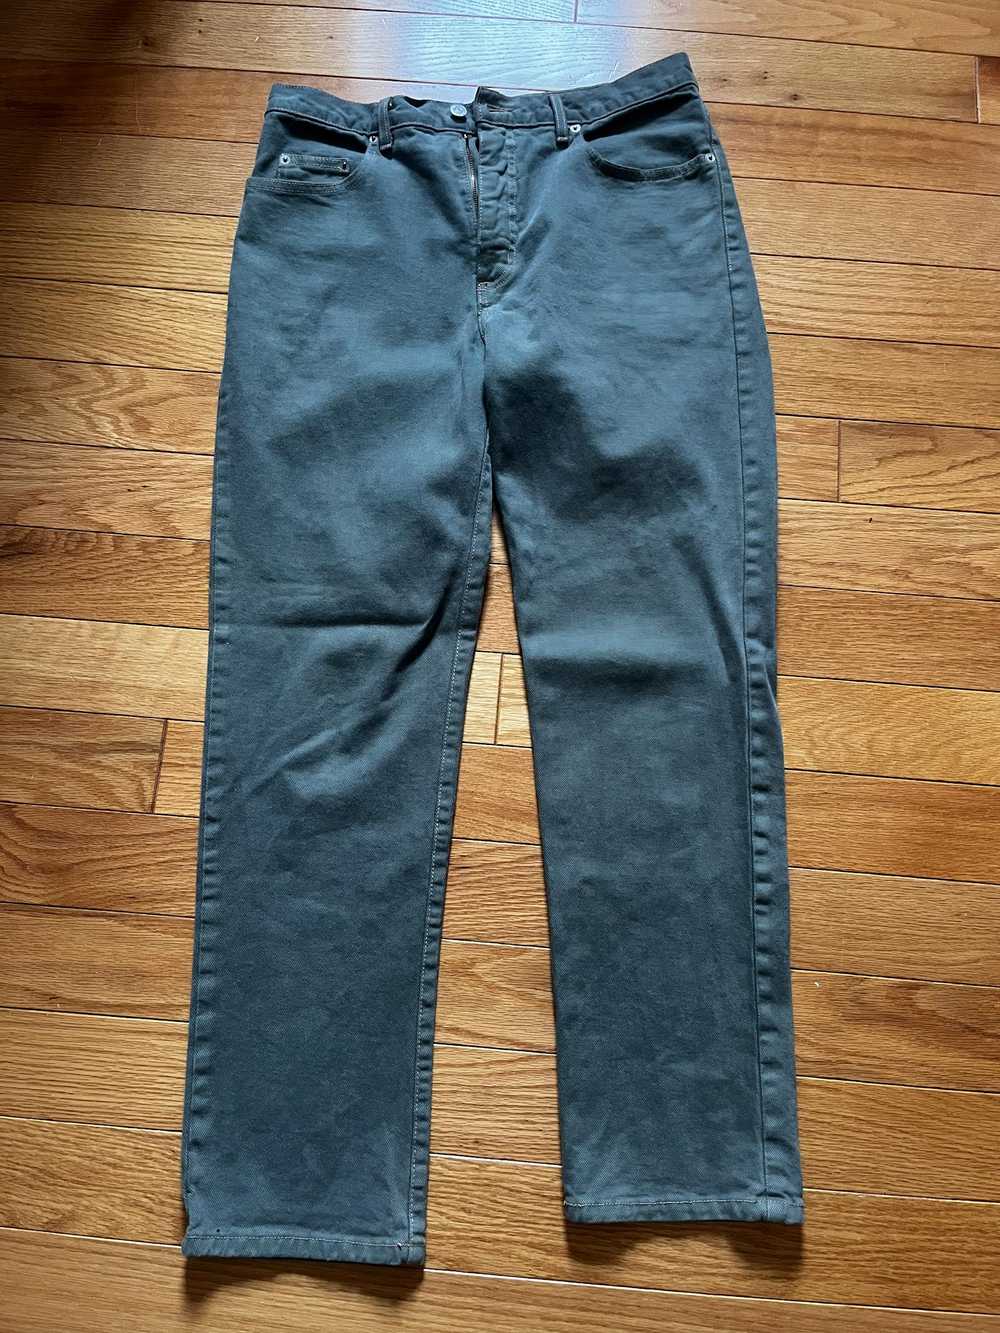 Guess Vintage Guess Jeans - image 3